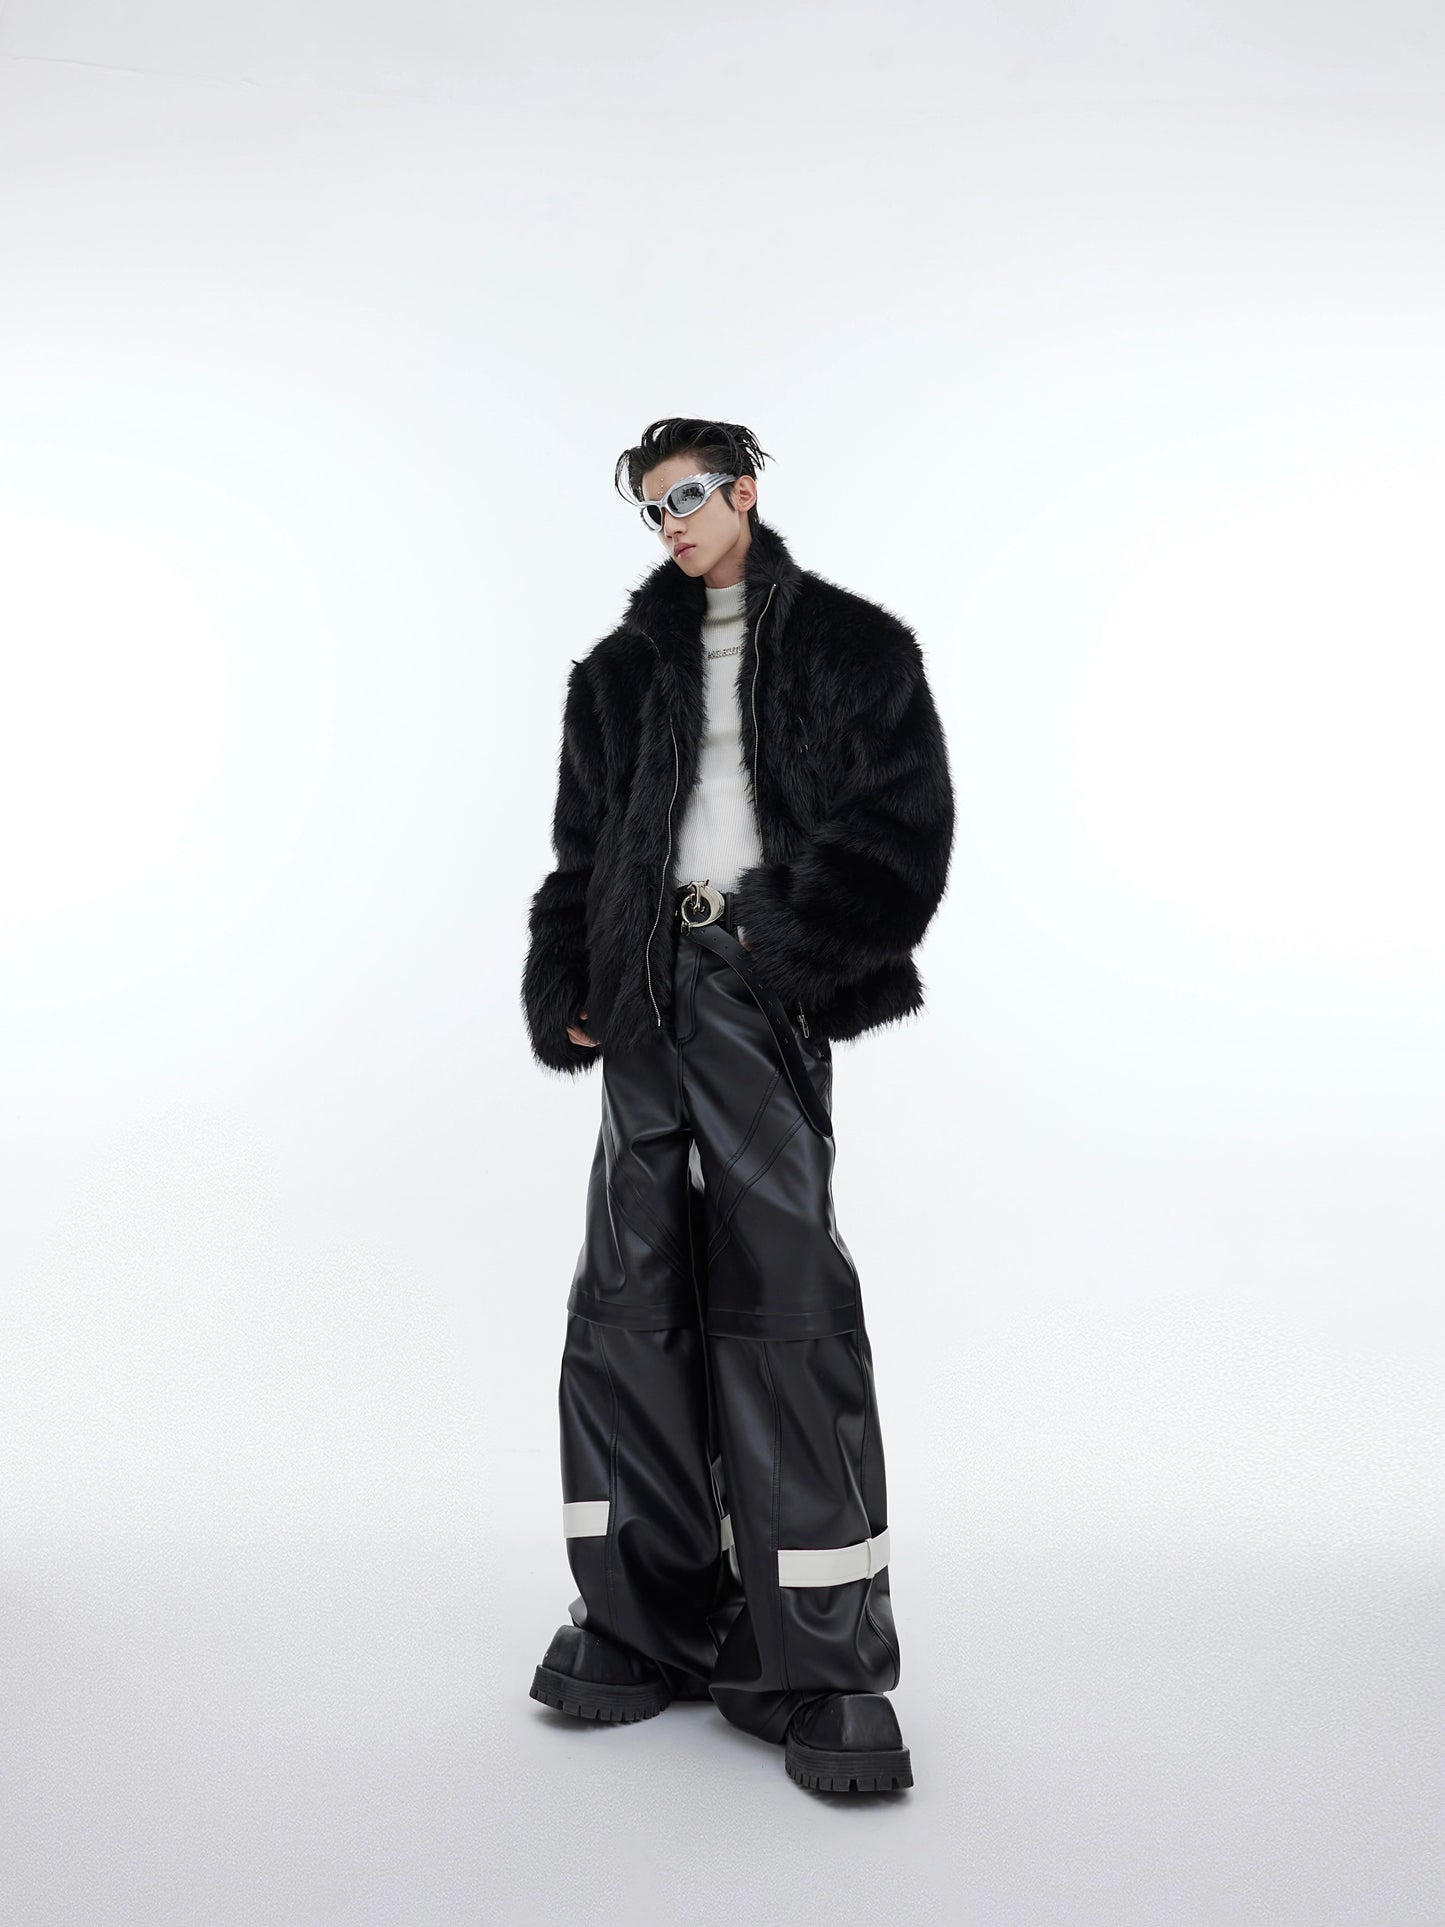 CulturE is a small niche light luxury mink plush plush jacket with a metallic design sense loose solid color cropped fur